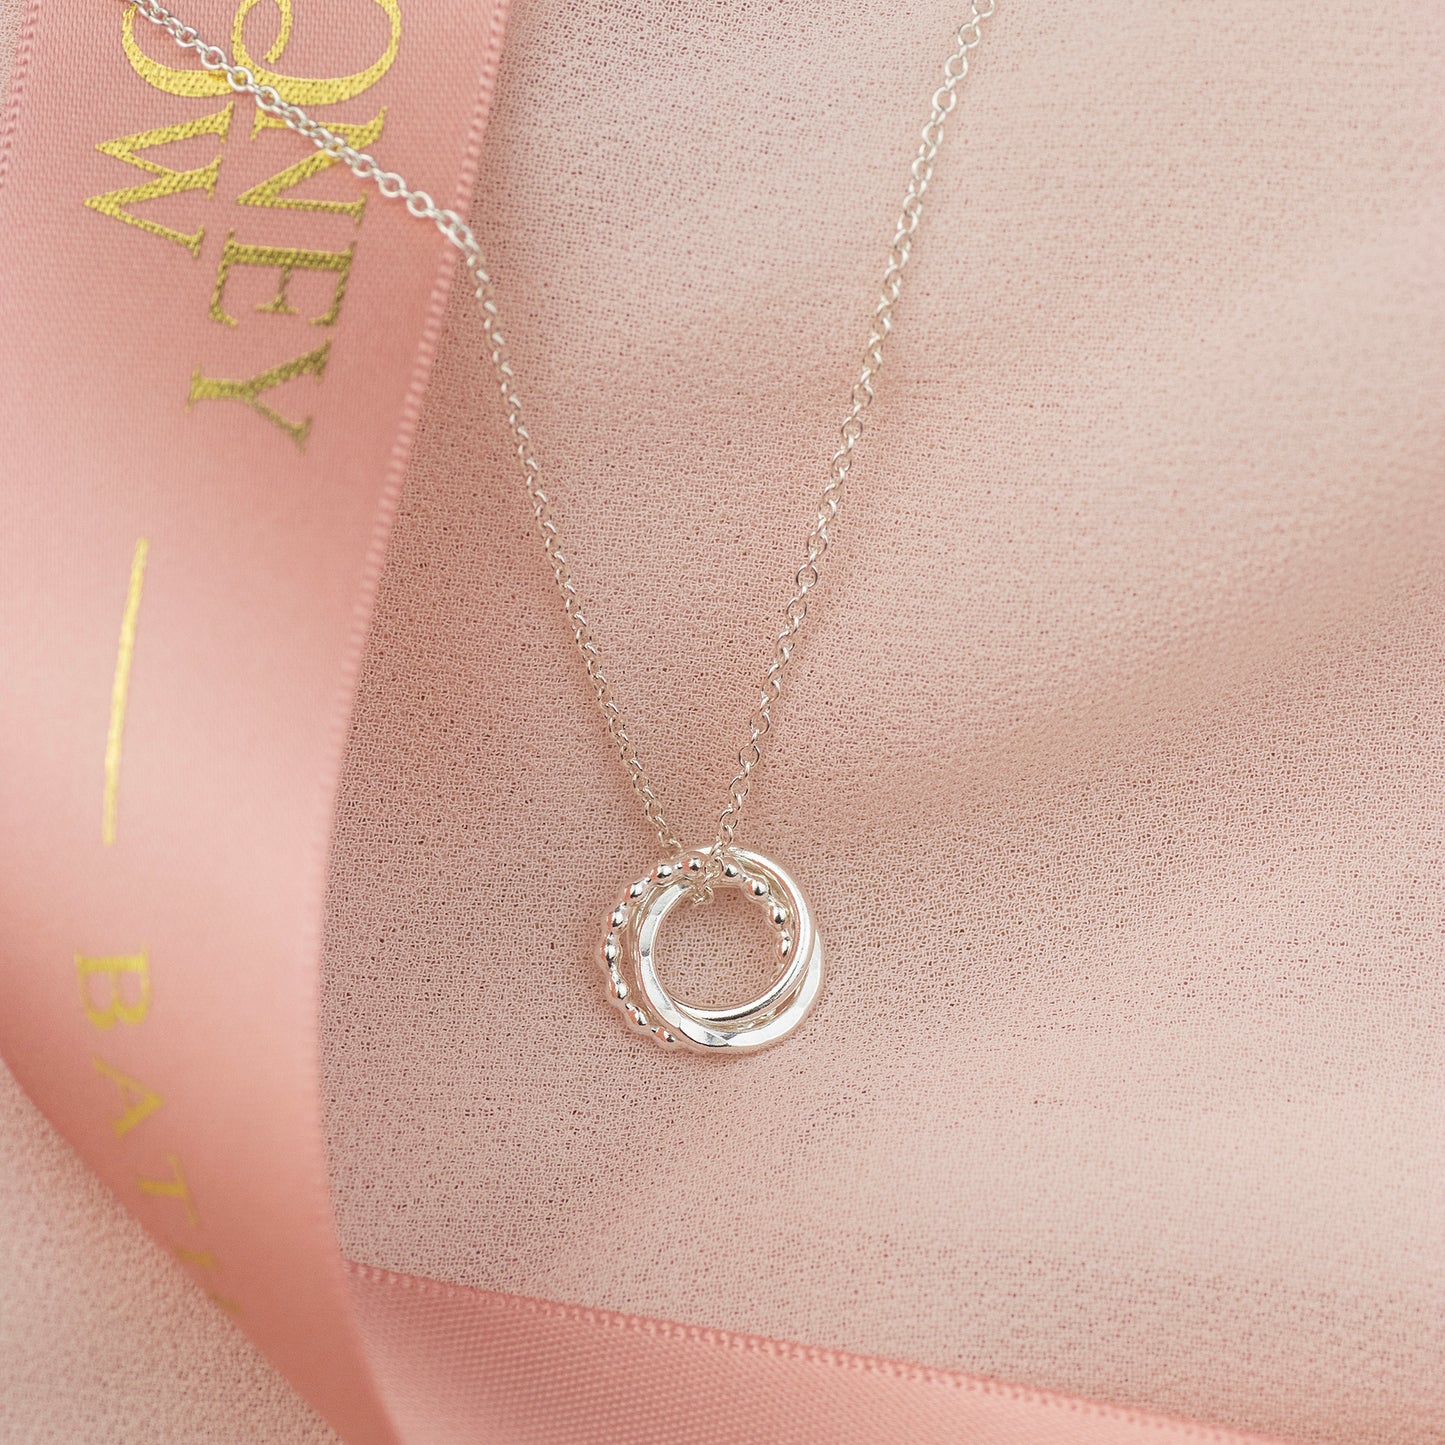 Mum-To-Be Gift - Silver Love Knot Necklace